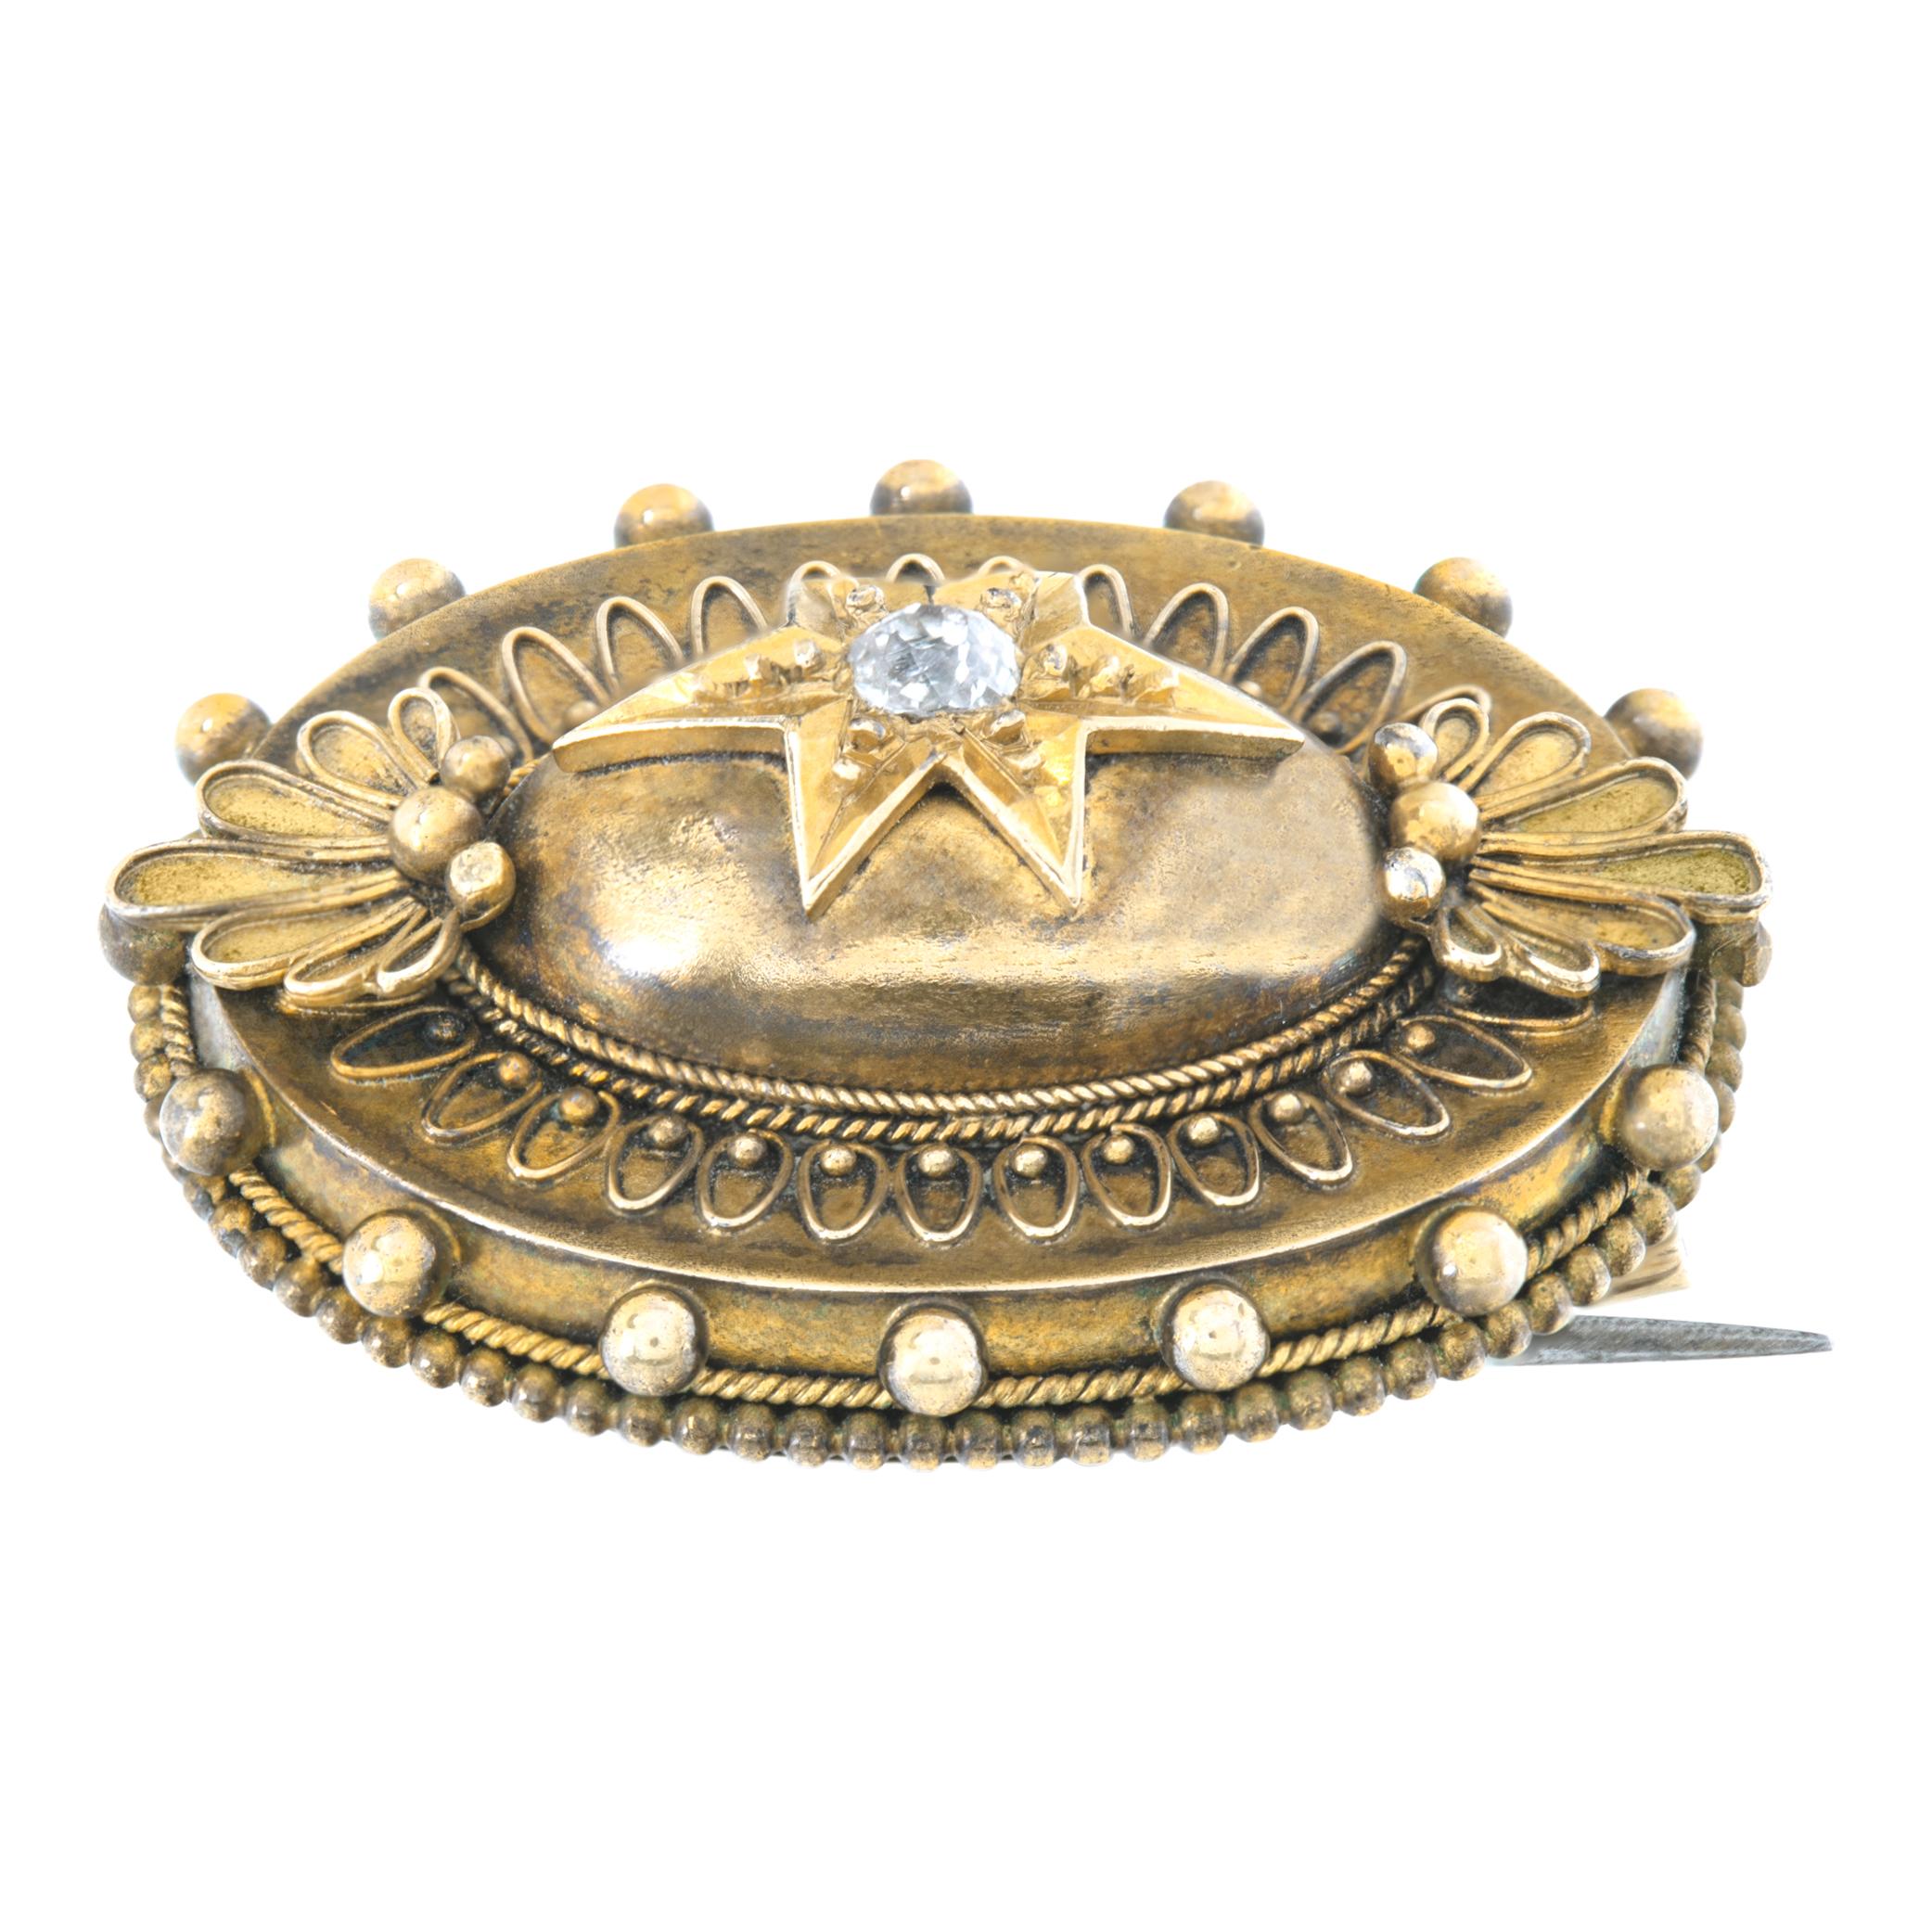 Etruscan revival brooch, circa 1990,  Victorian era Antique brooch in 18K (top tested) yellow gold. Center round brilliant cut diamond approx. 0.10 carat. White & eye clean.  Measurements: 28mm W. x 22mm H (1 1/8 x 7/8 